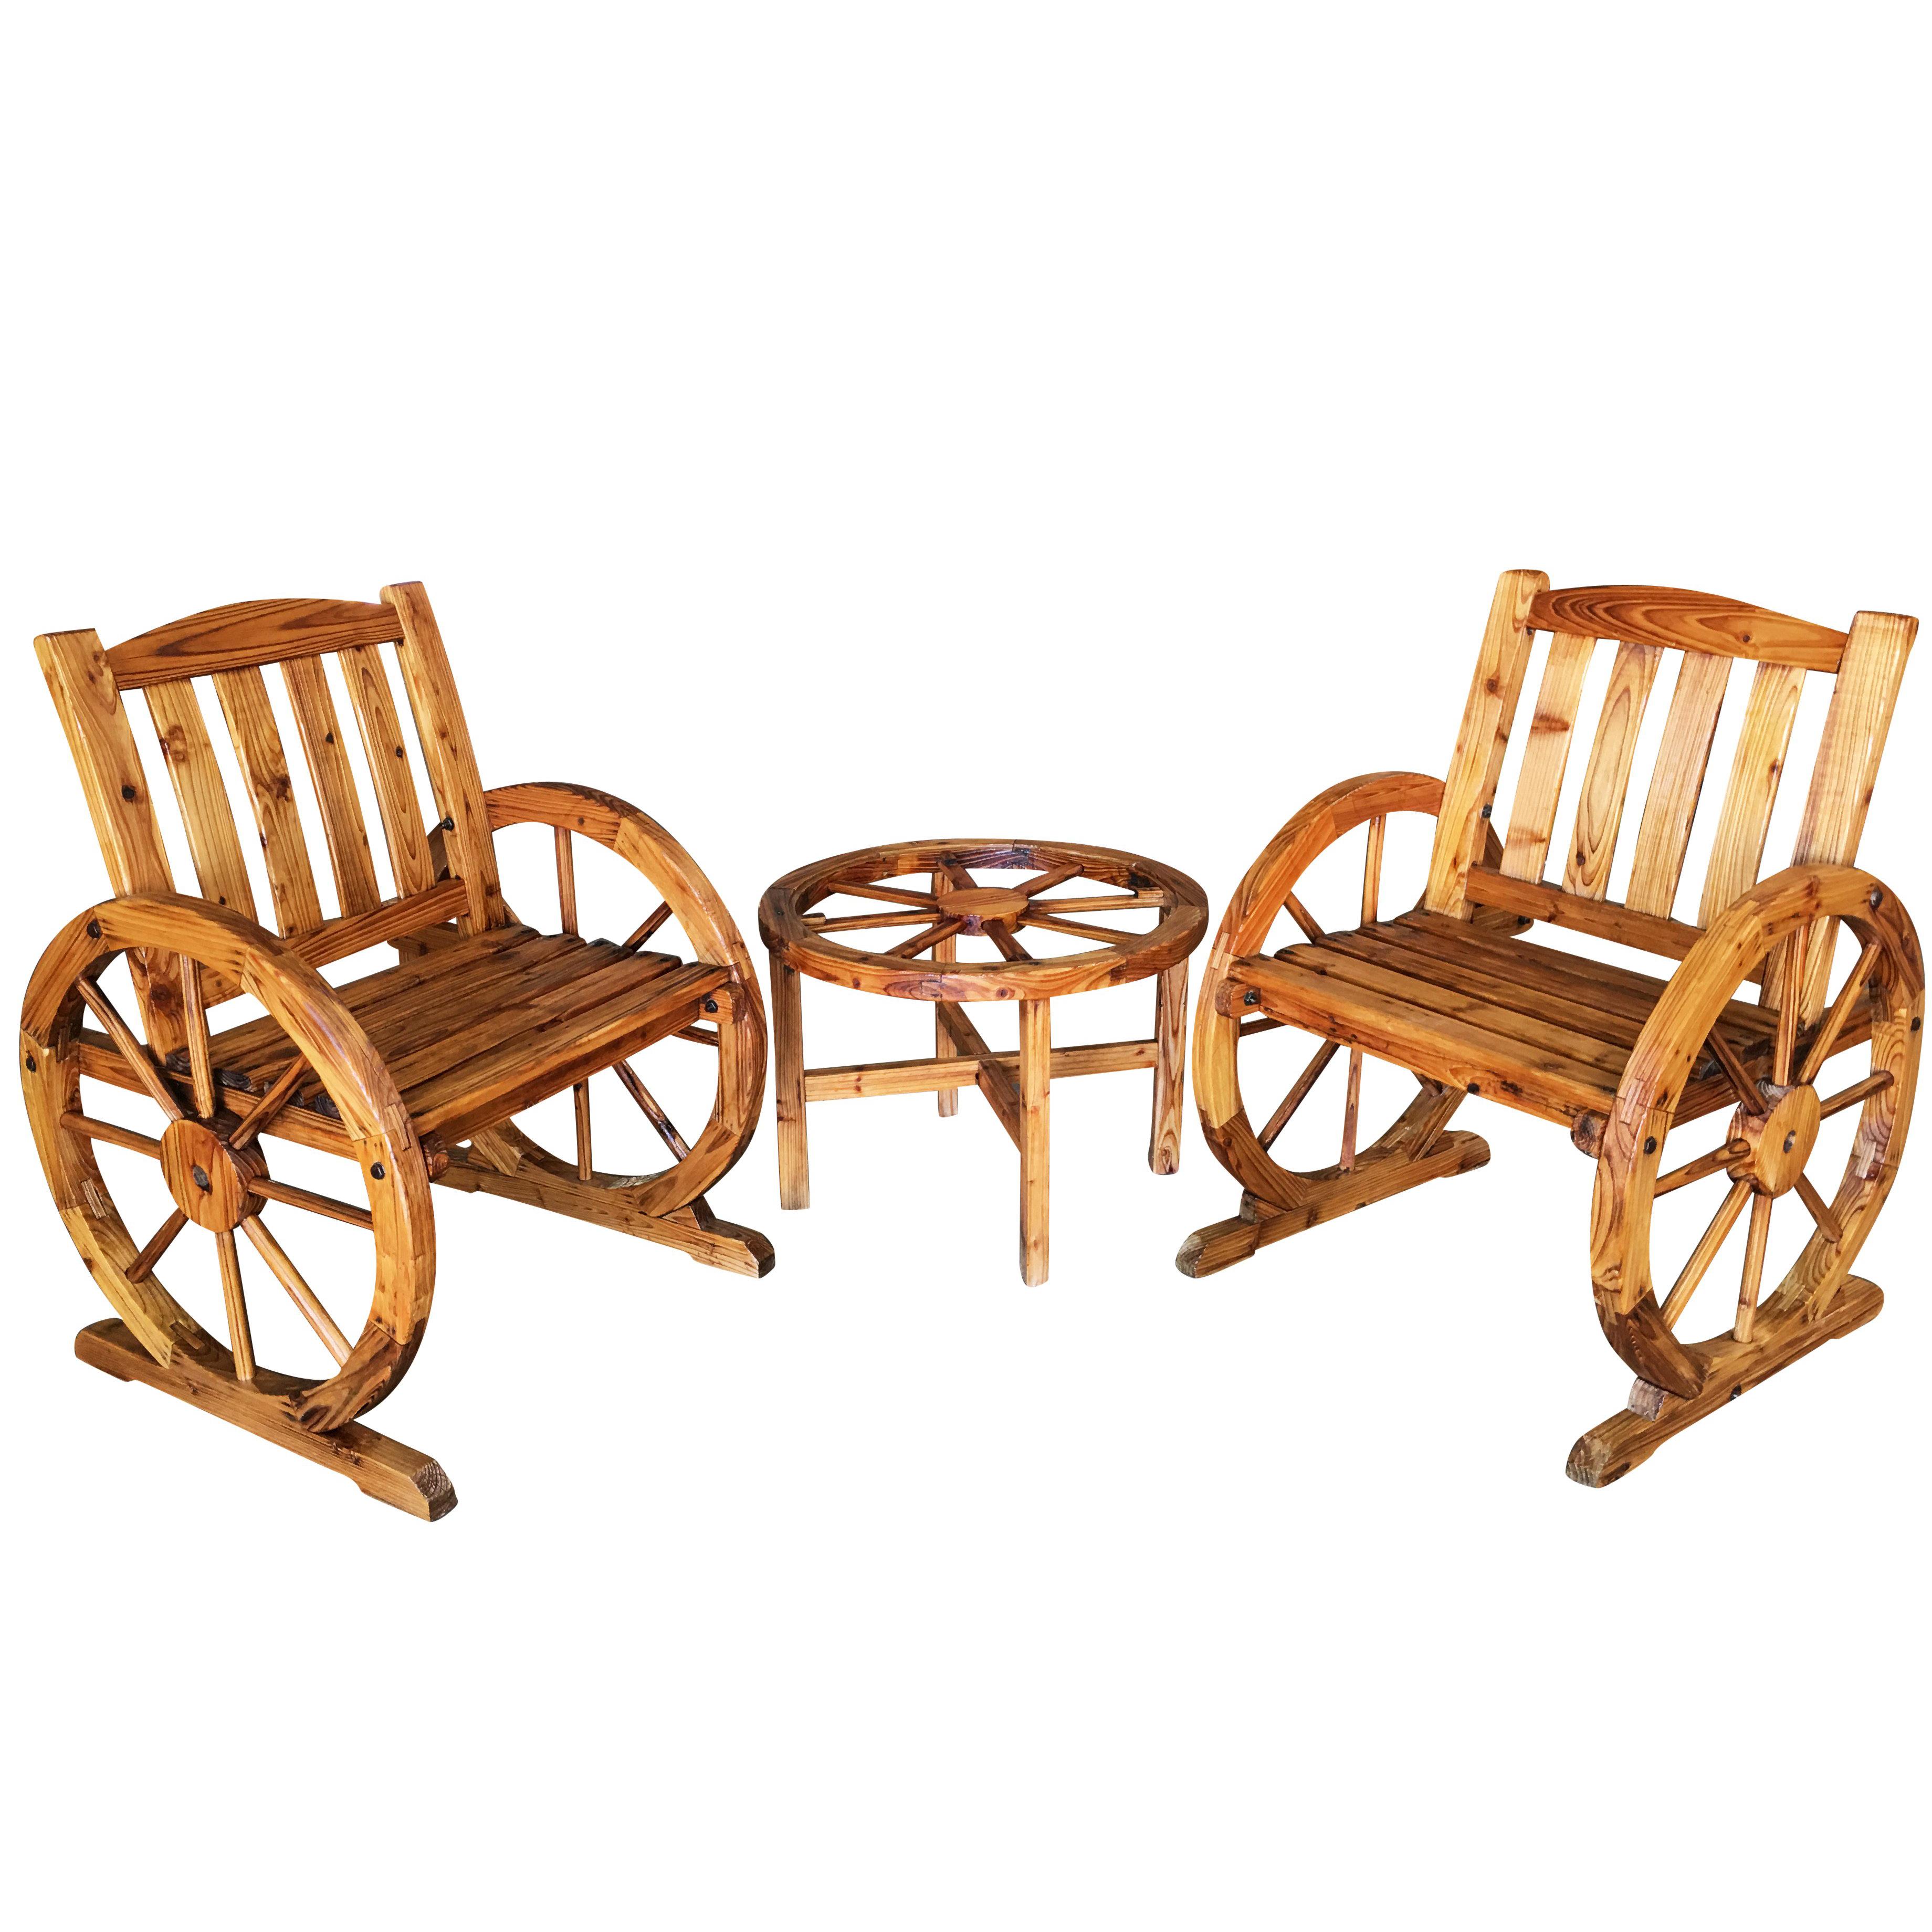 Western Folk Art Wagon Wheel Table and Chairs Set, 1960 For Sale